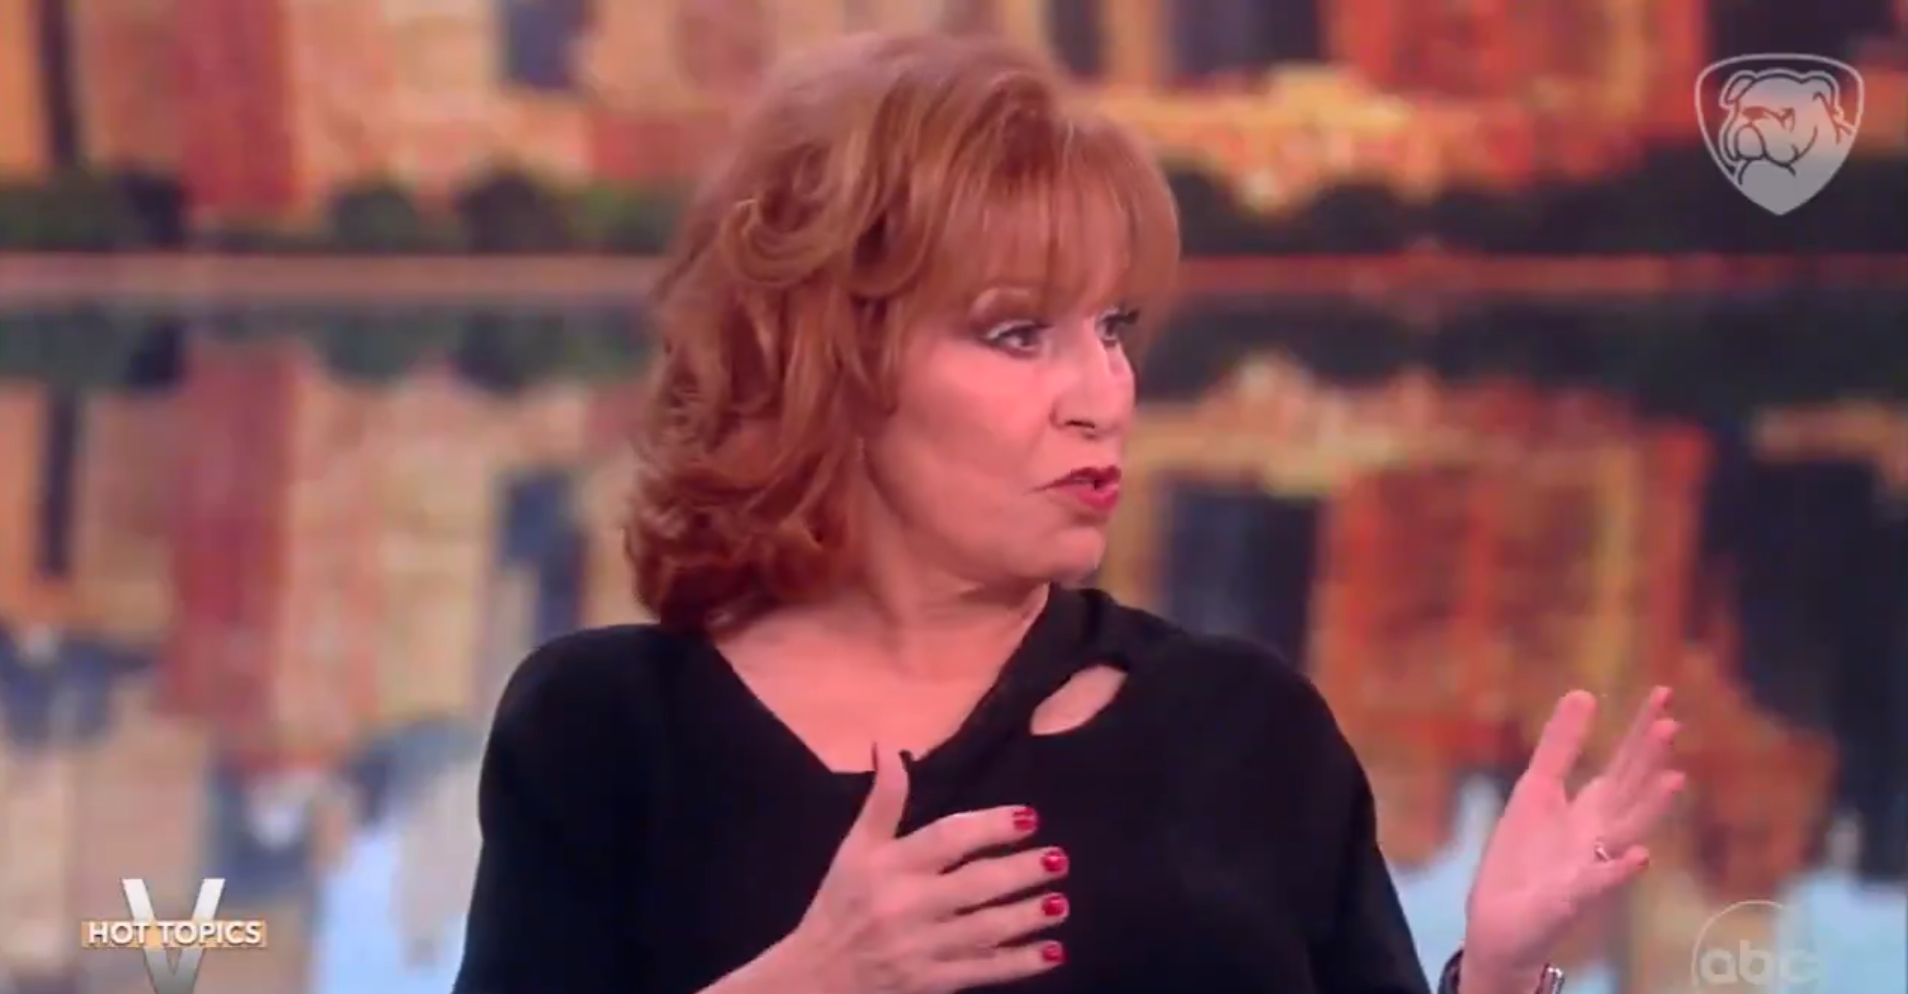 Joy Behar Labels Republicans ‘Commies’ Who Are ‘In the Bed With the Russians’